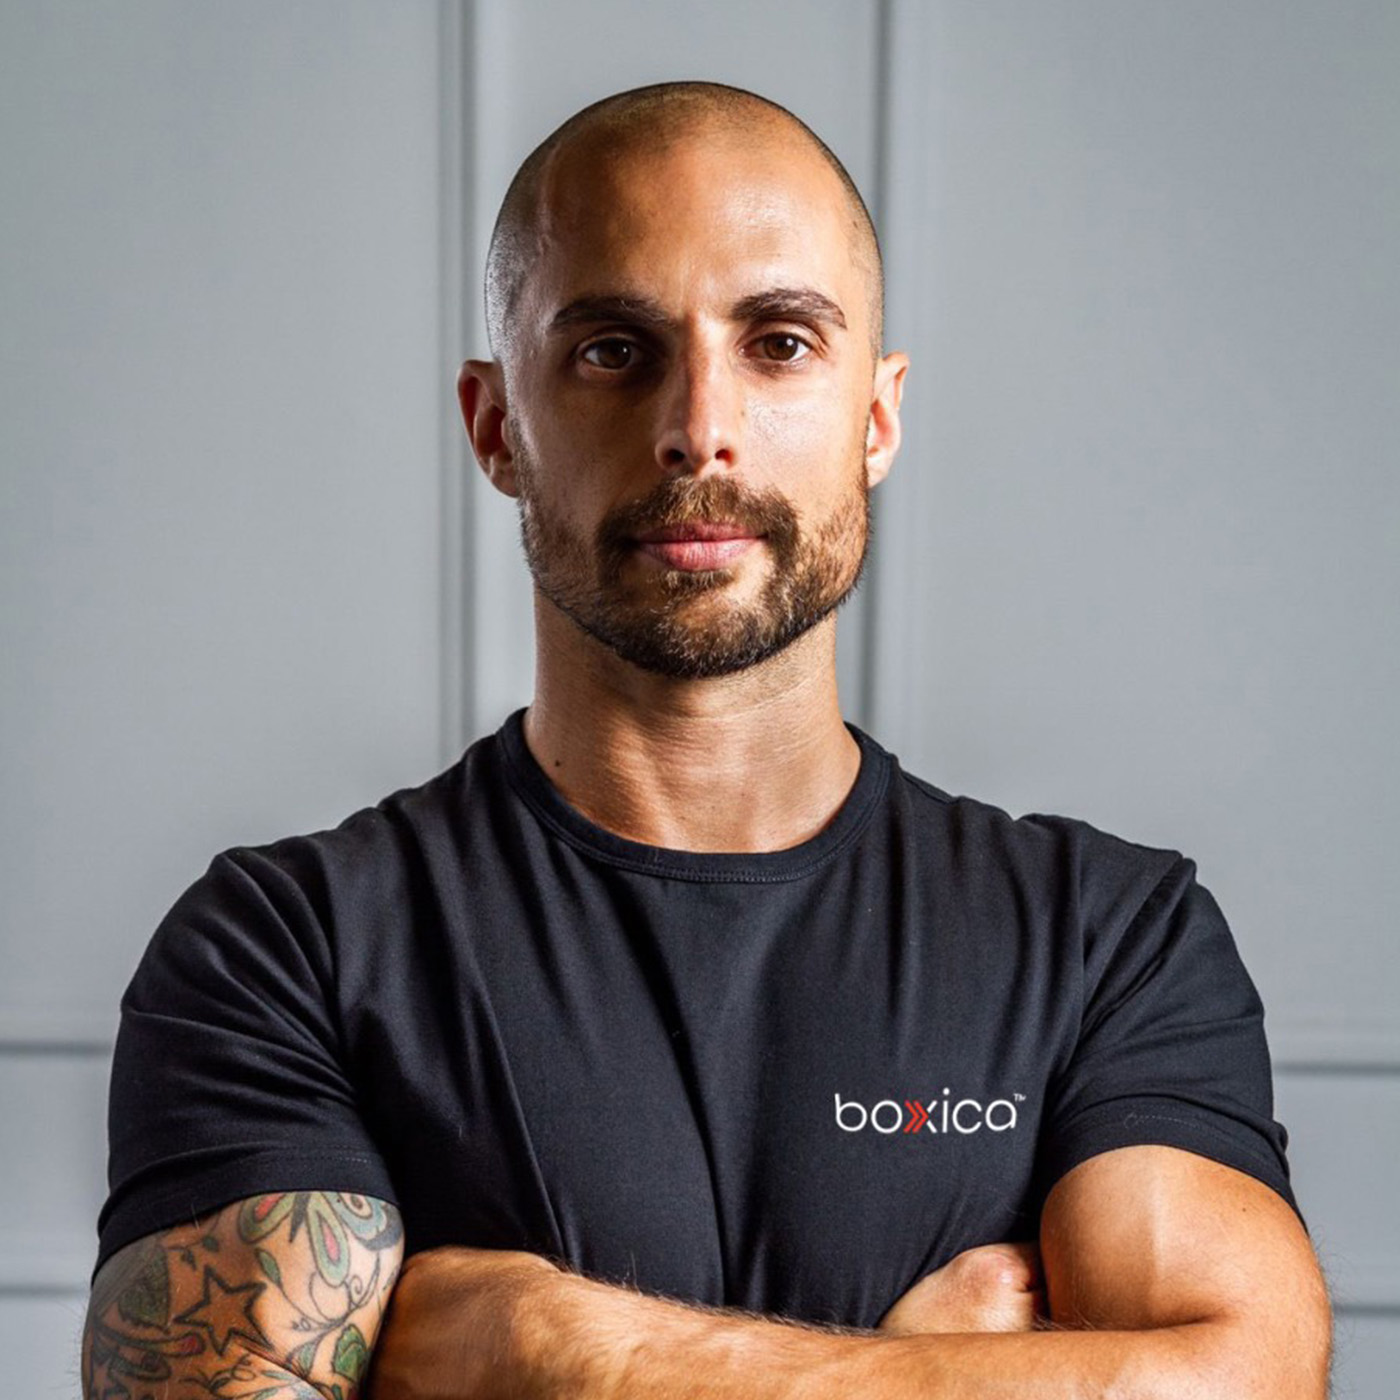 Boxica’s Cyrus Rustom knows in a gym, community is everything